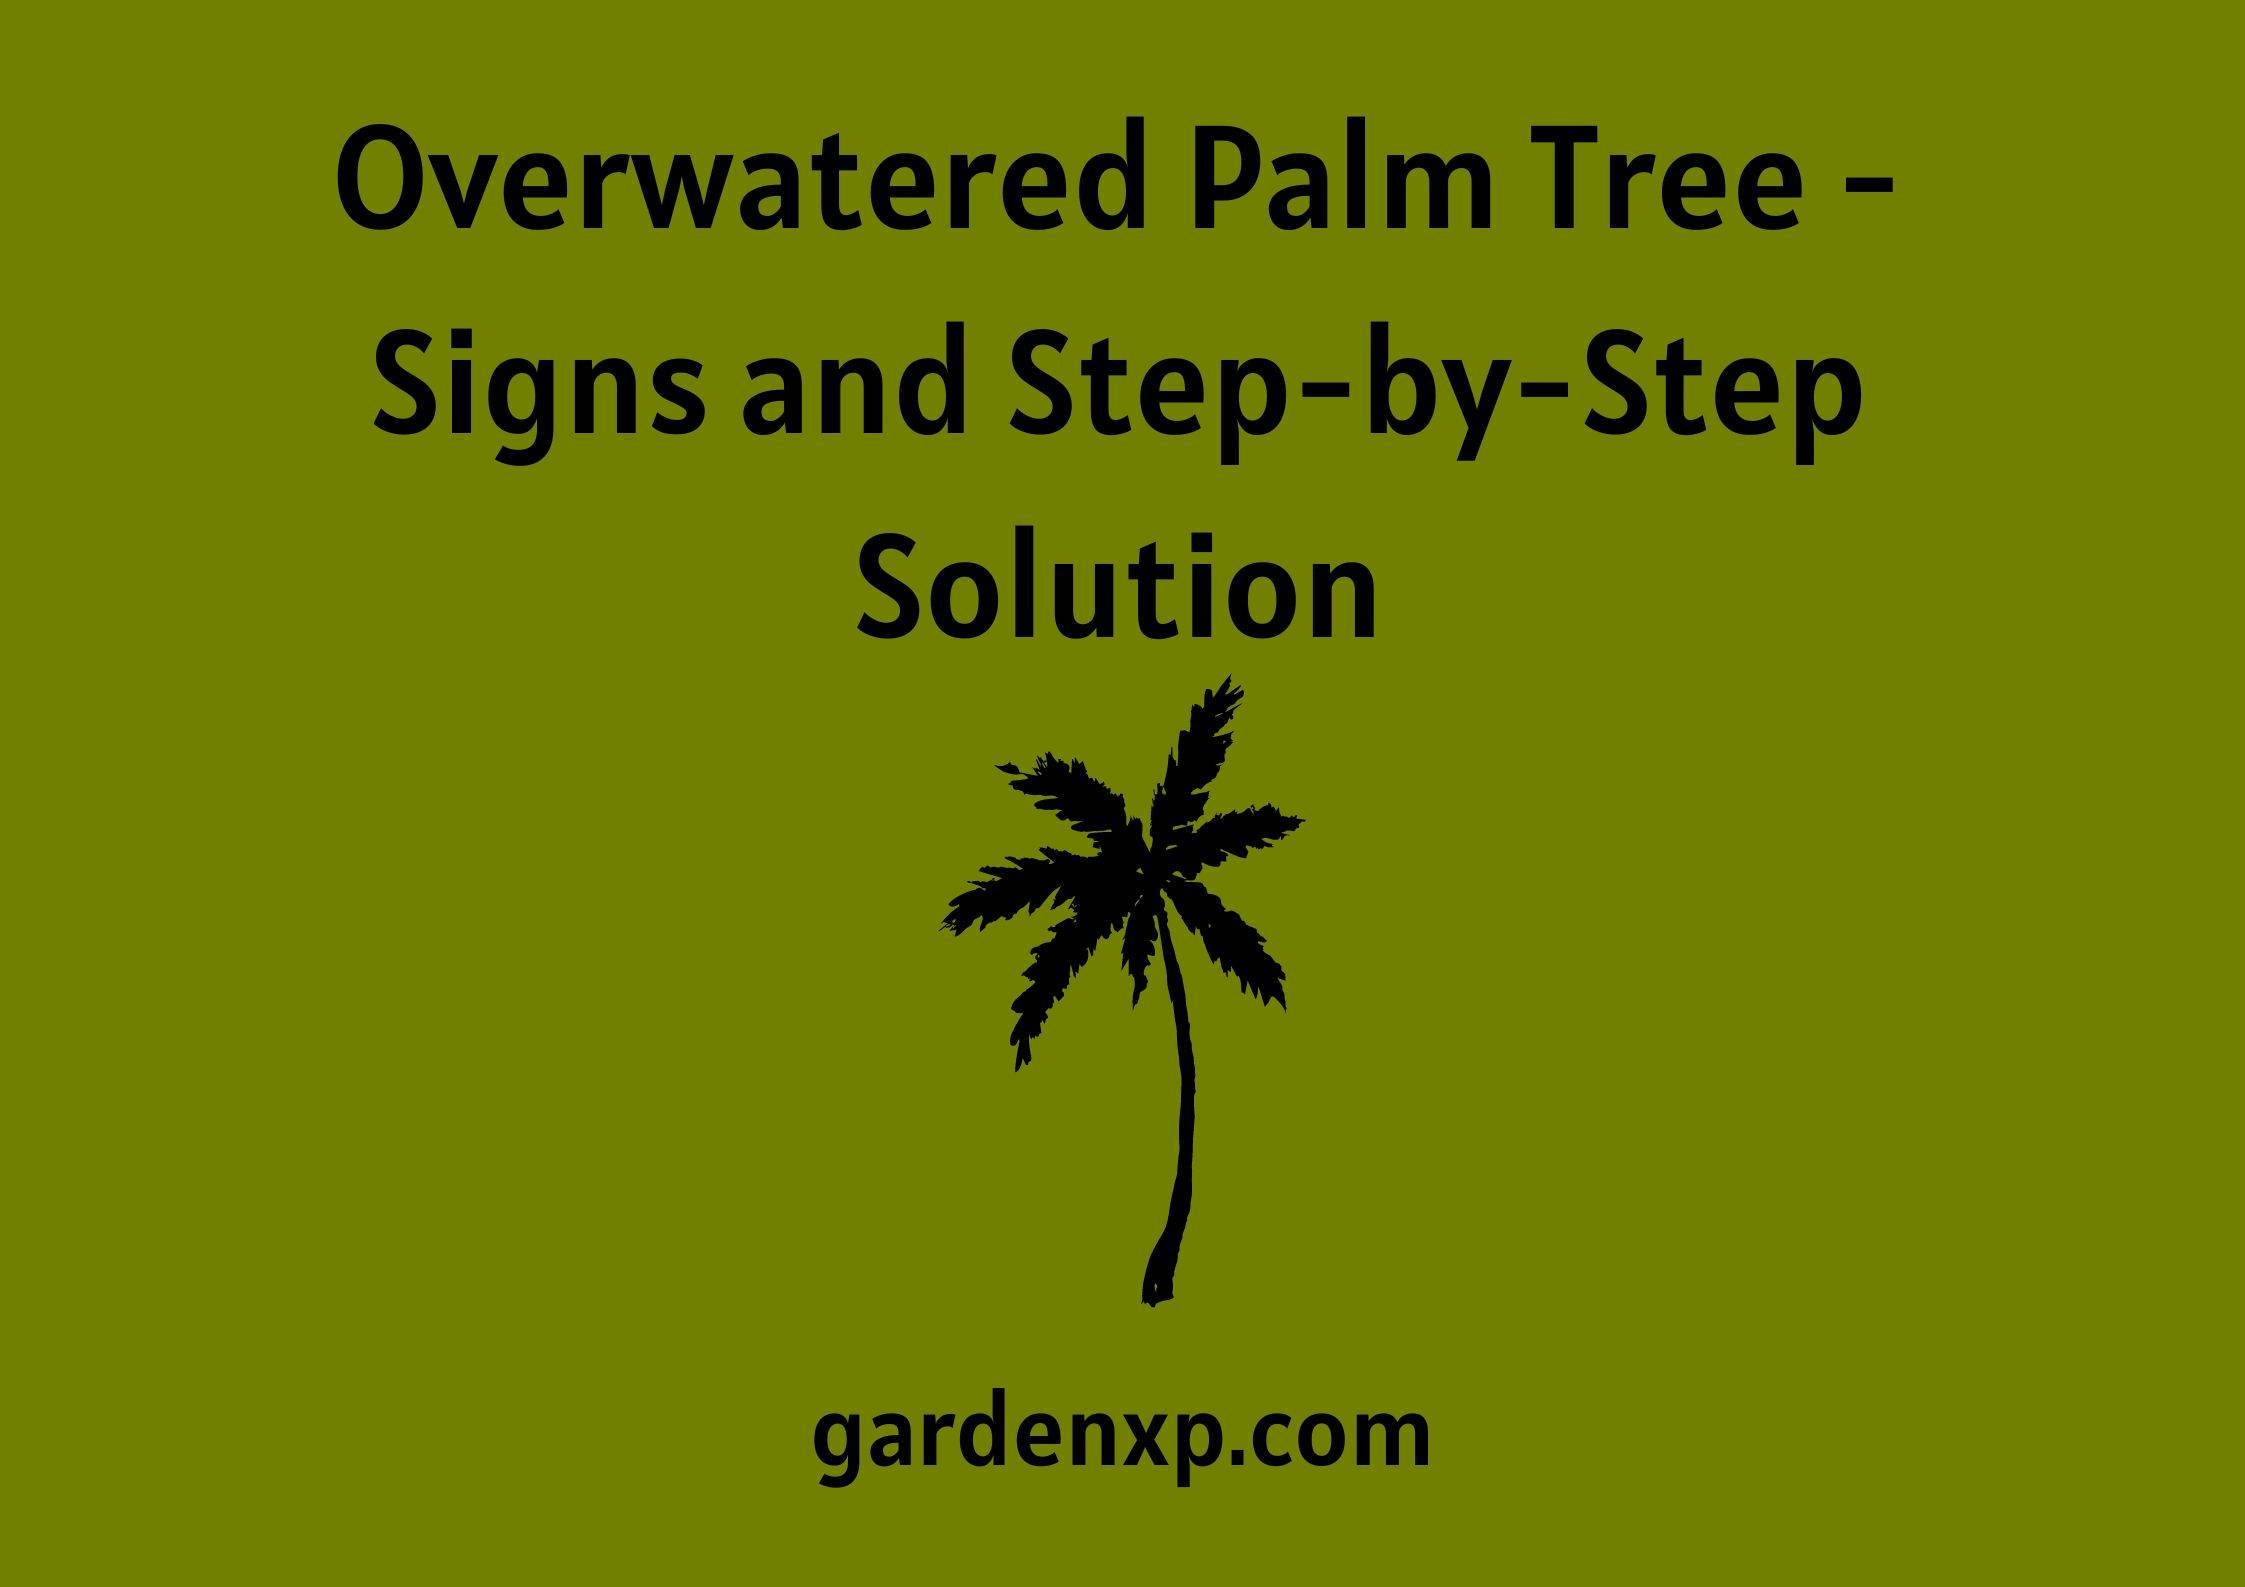 Overwatered Palm Tree - Signs and Step-by-Step Solution